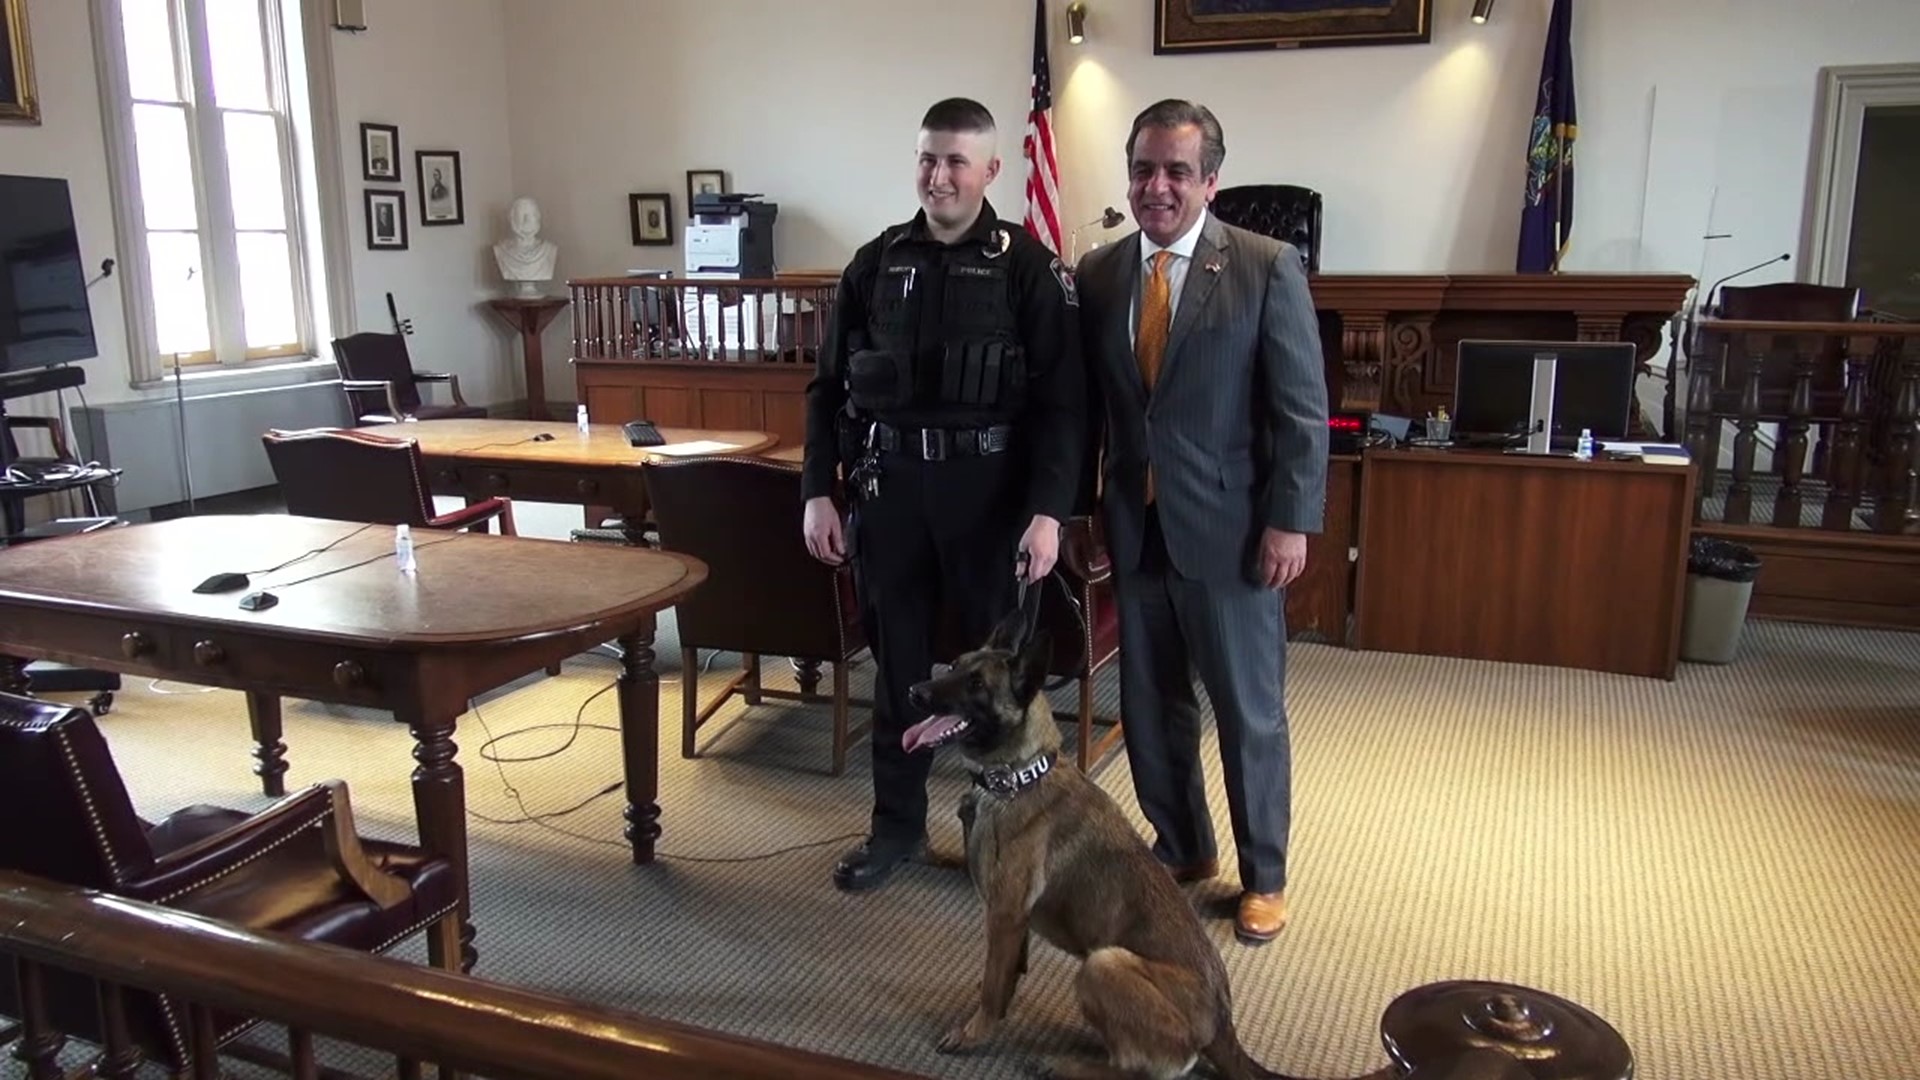 The township received a state grant to fully fund the new K-9 officer.